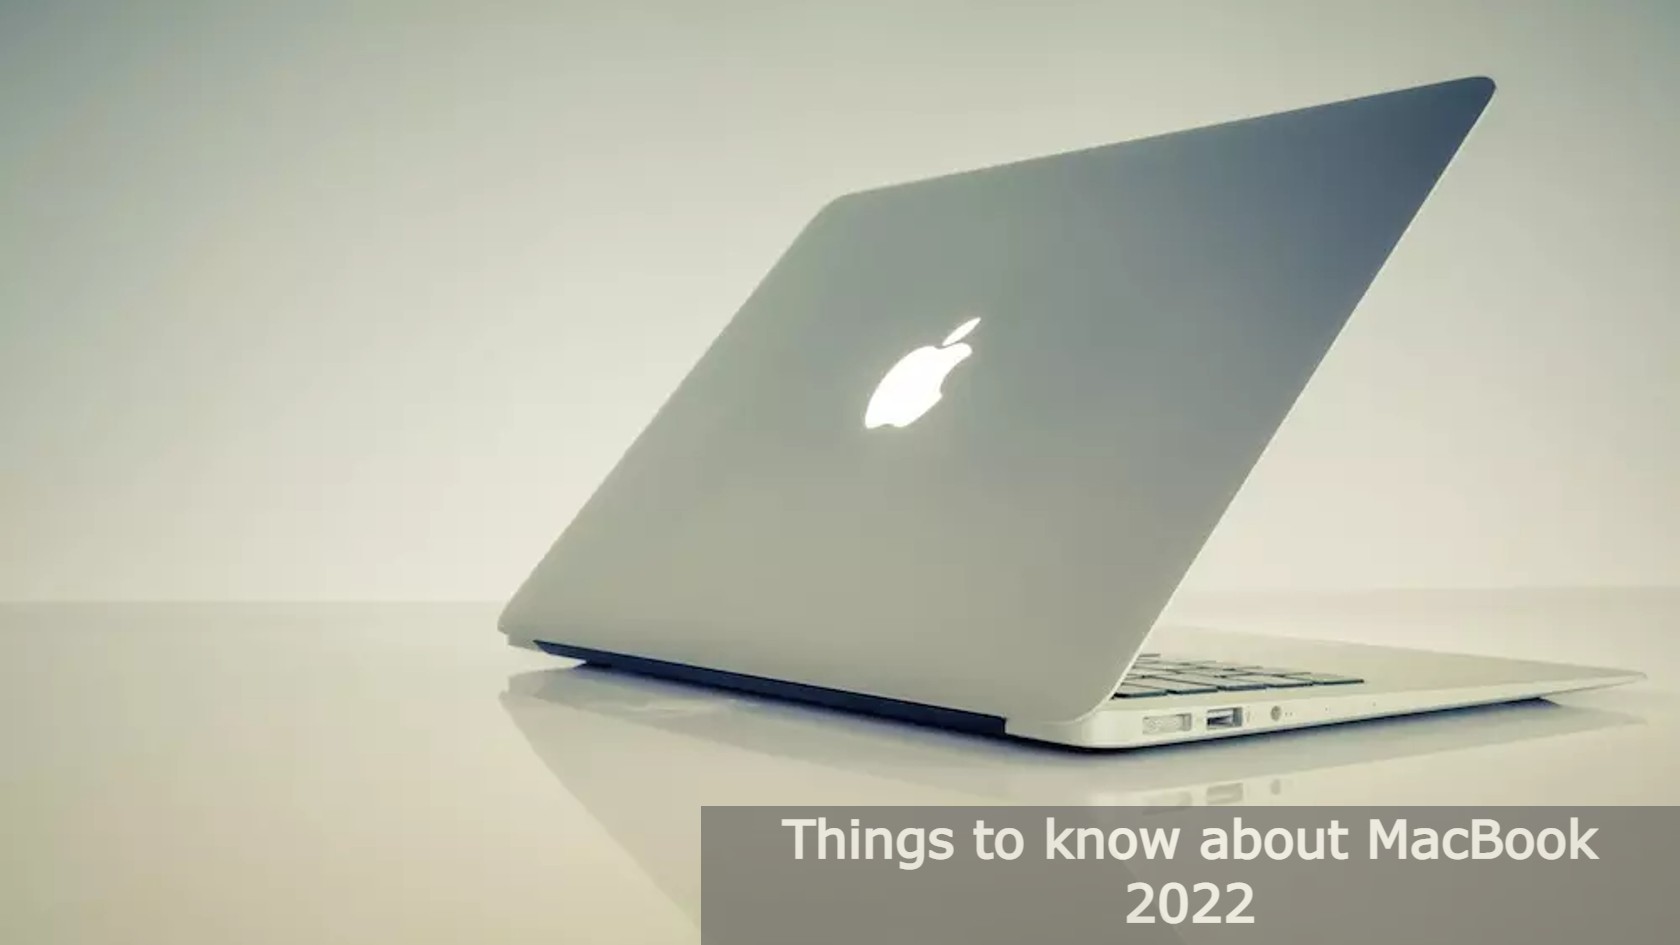 Things to know about MacBook